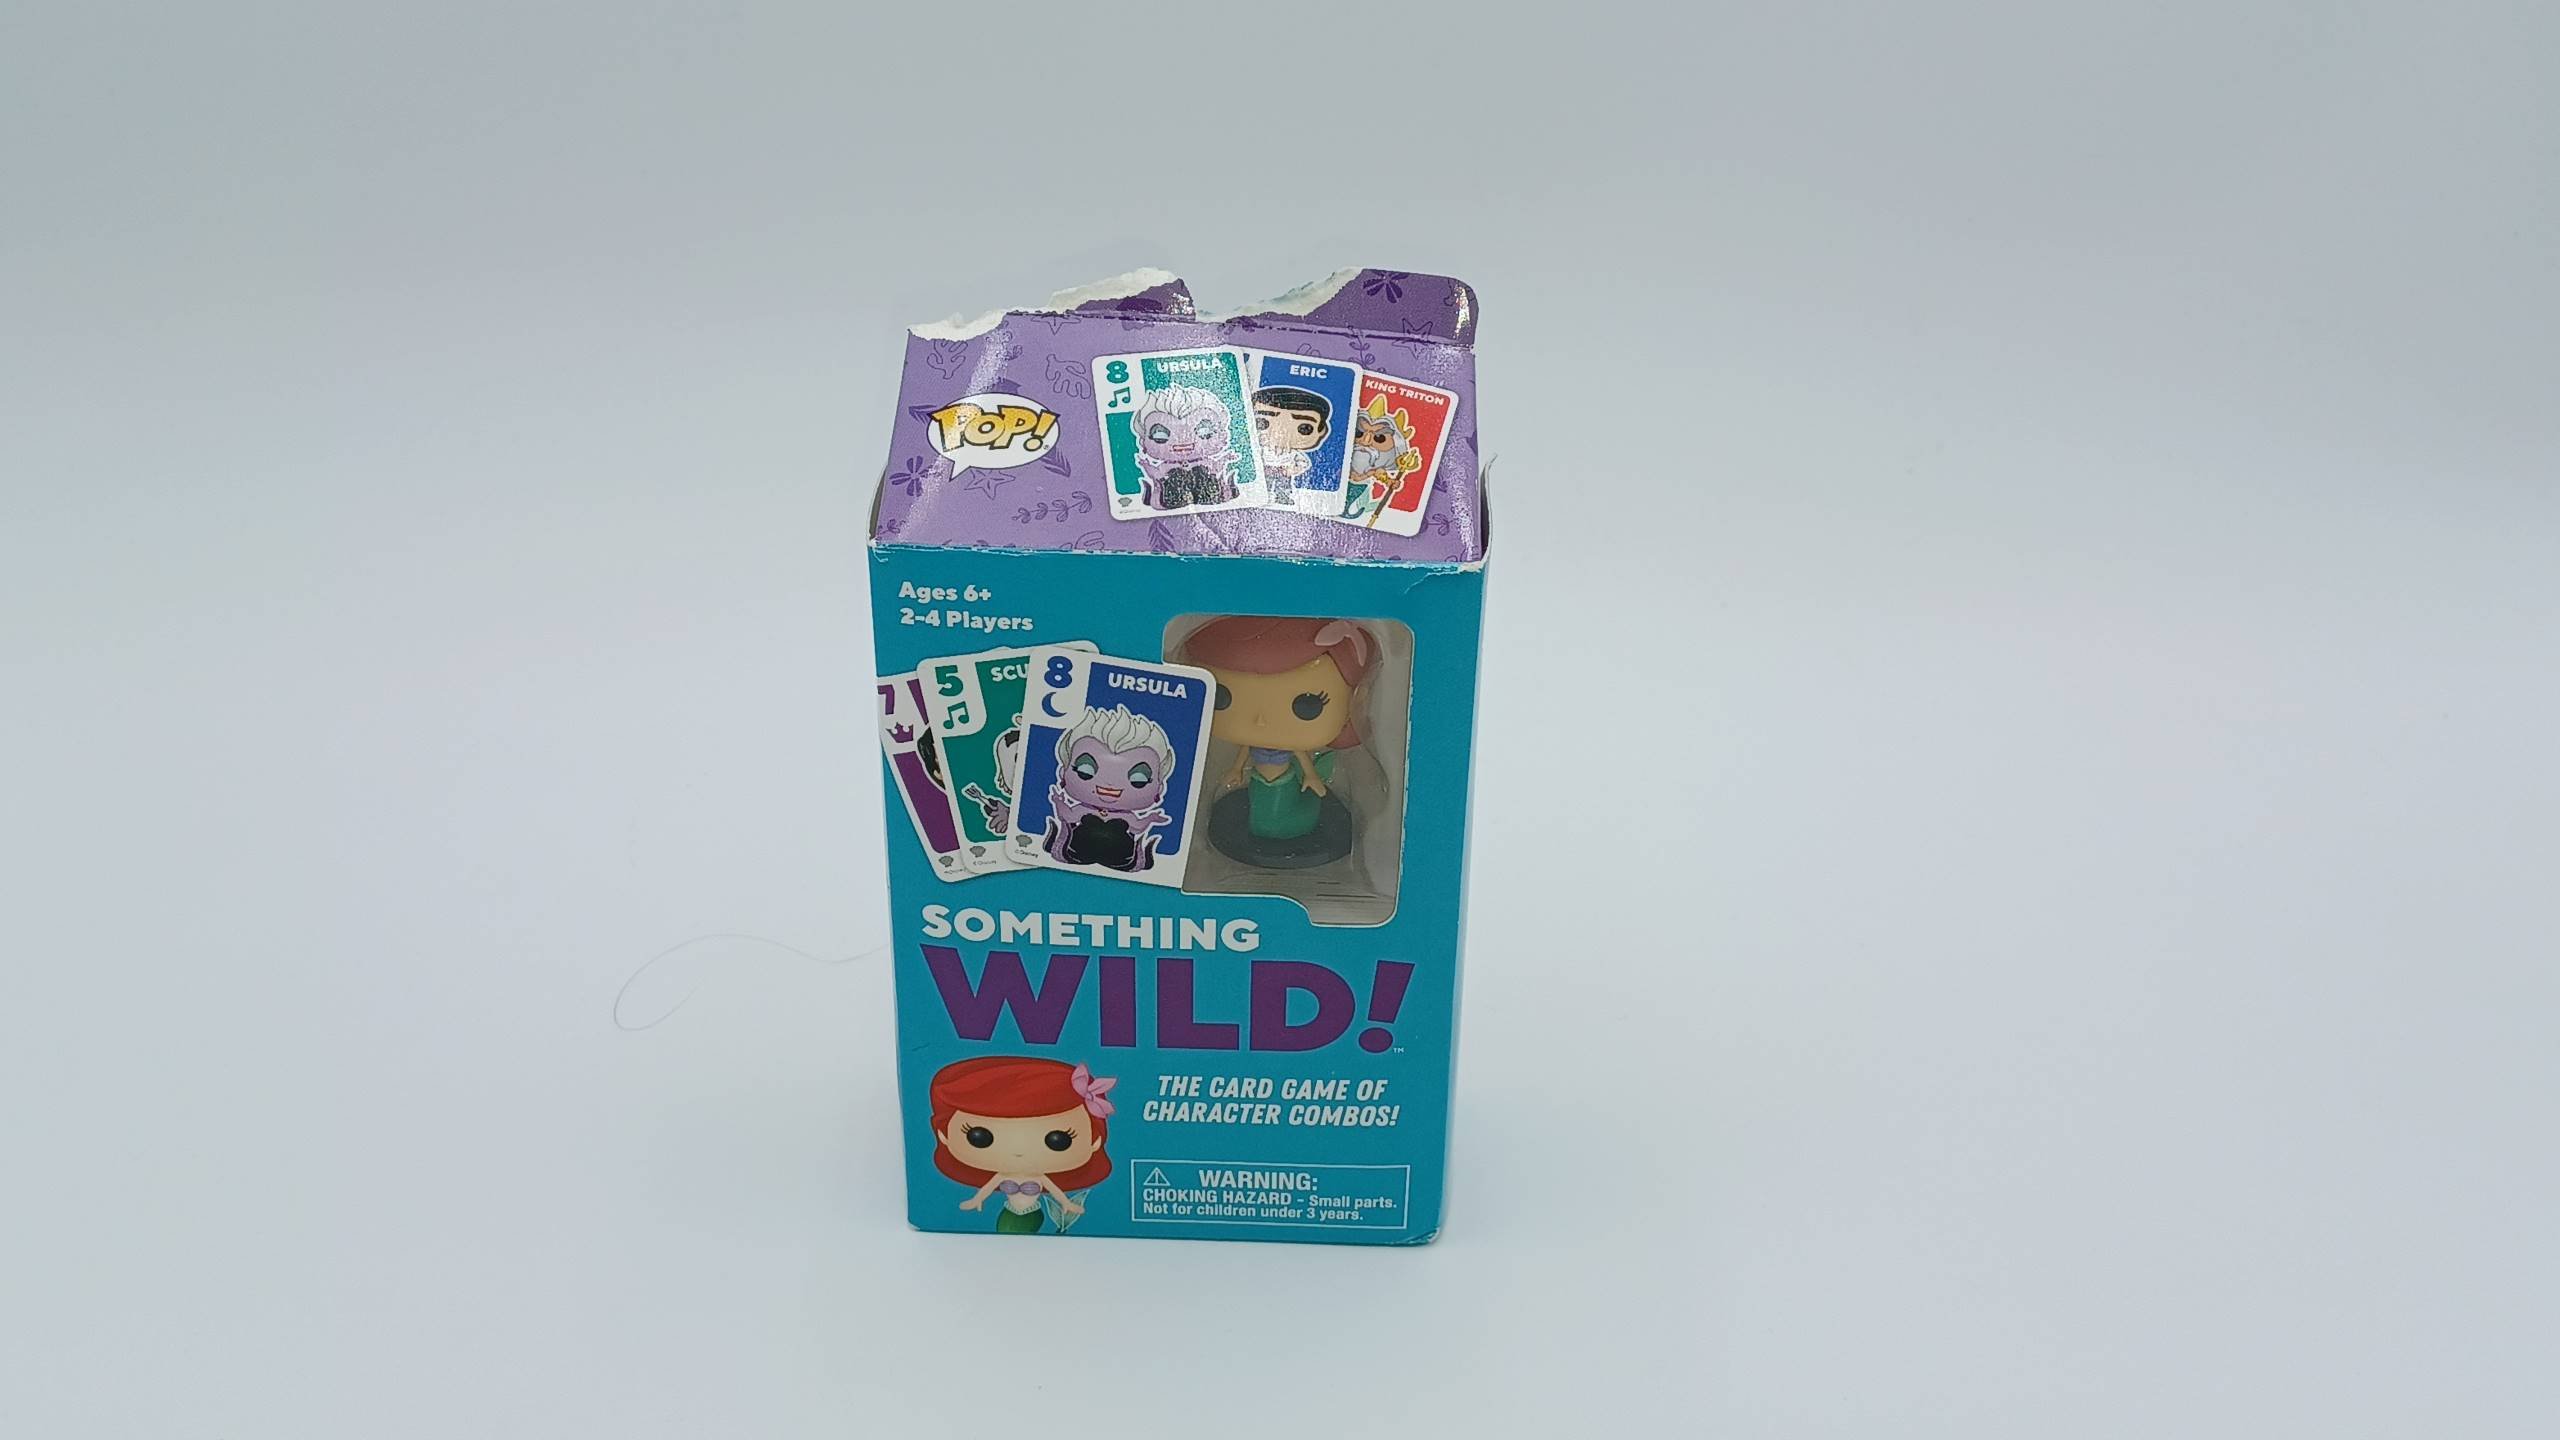 A picture of Something Wild!: The Little Mermaid's box featuring three cards, the text "Something Wild! The Card Game of Character Combos!," a picture of the figure included, and a cut-out portion of the box allowing you to see the figure.